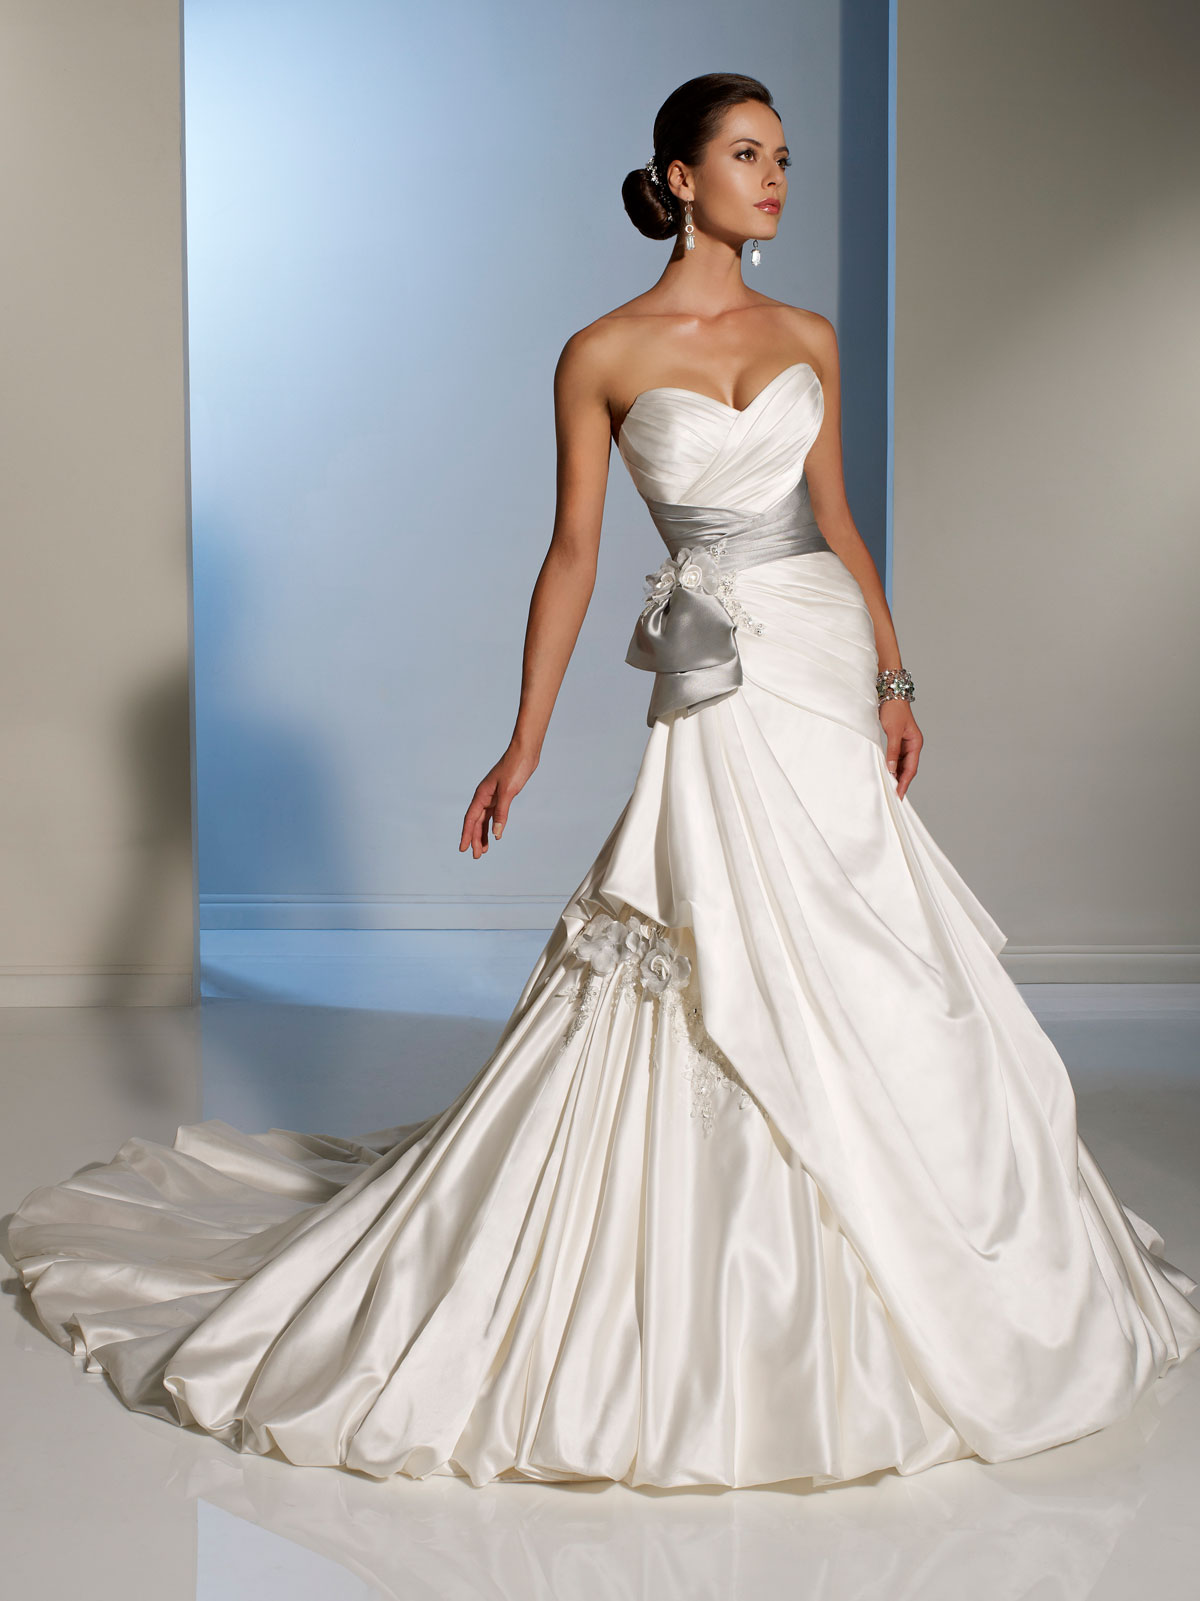 sweetheart wedding gown with silver sash